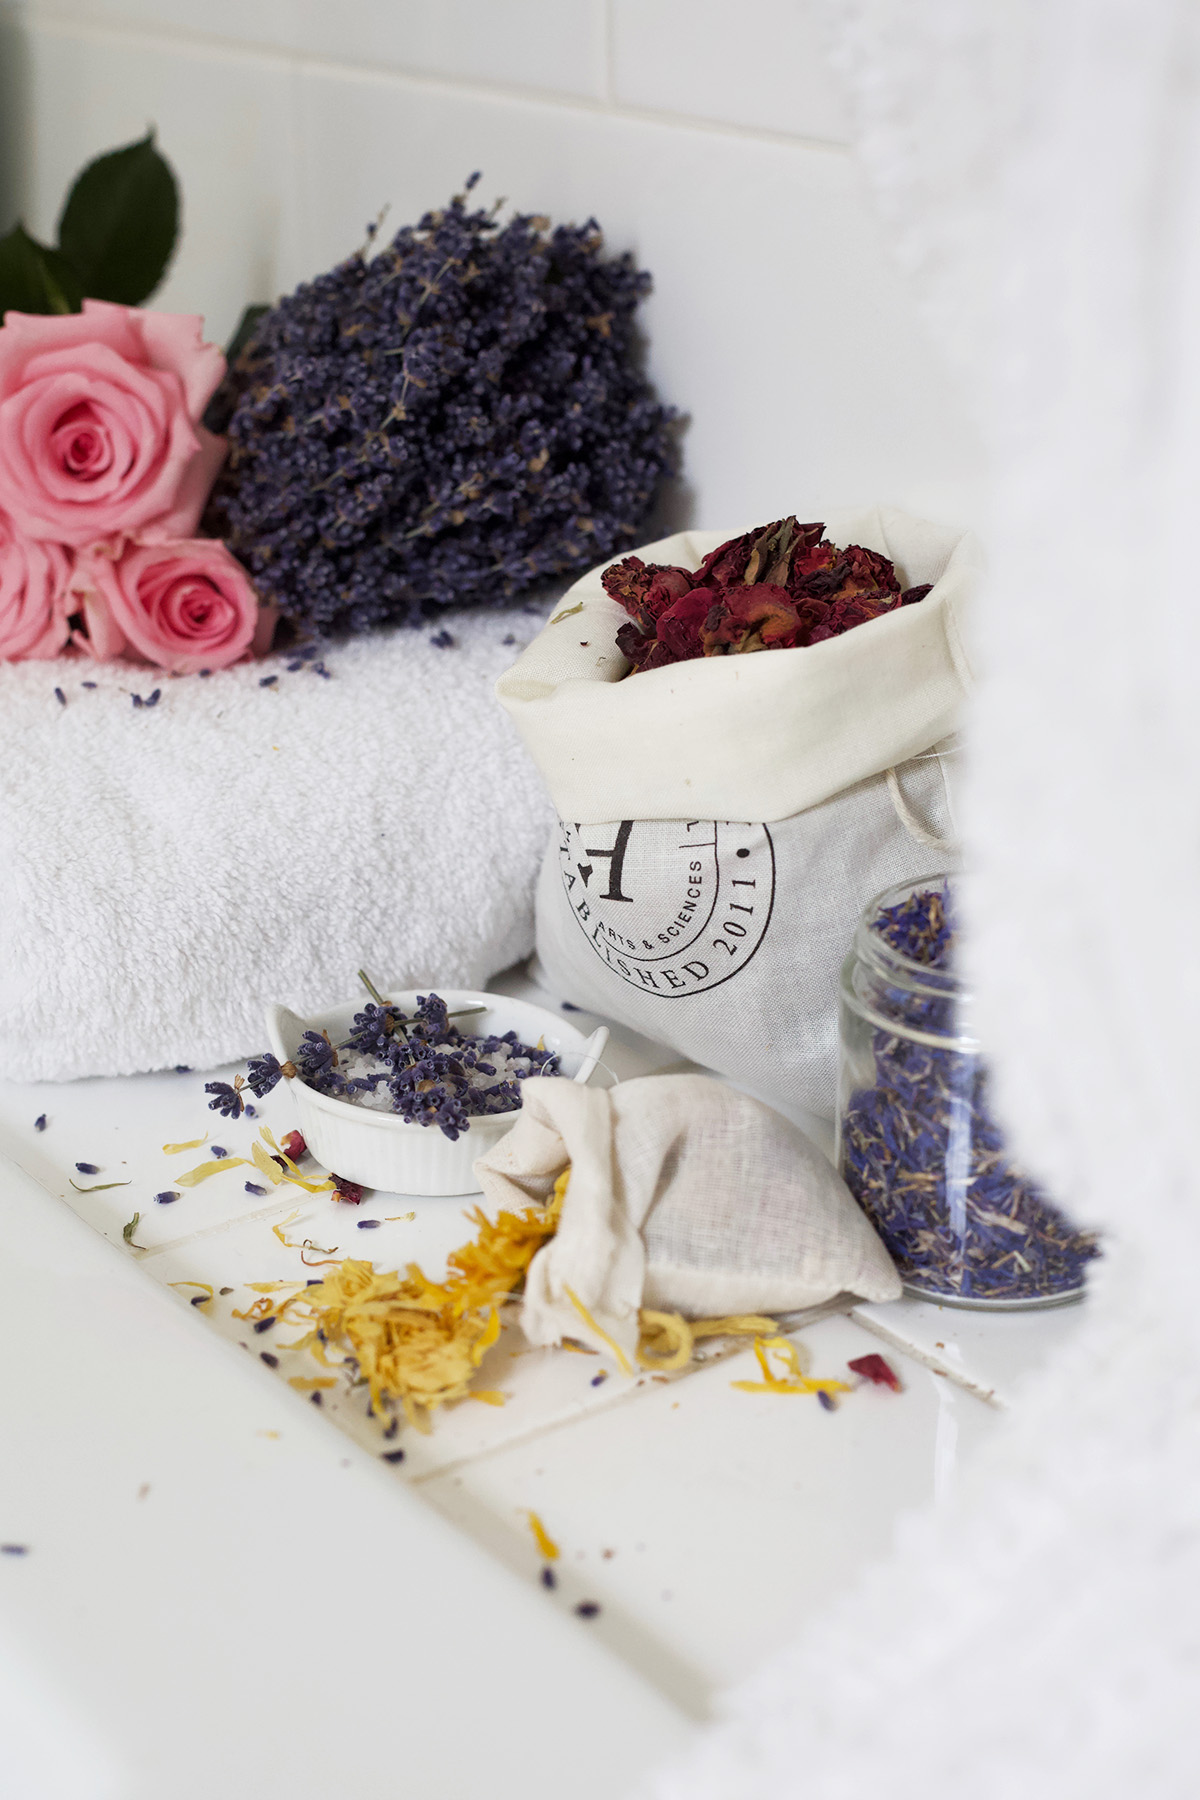 dried herbs sitting on a rolled up towel, in glass containers, and an Herbal Academy mulsin bag stuffed with dried rose petals